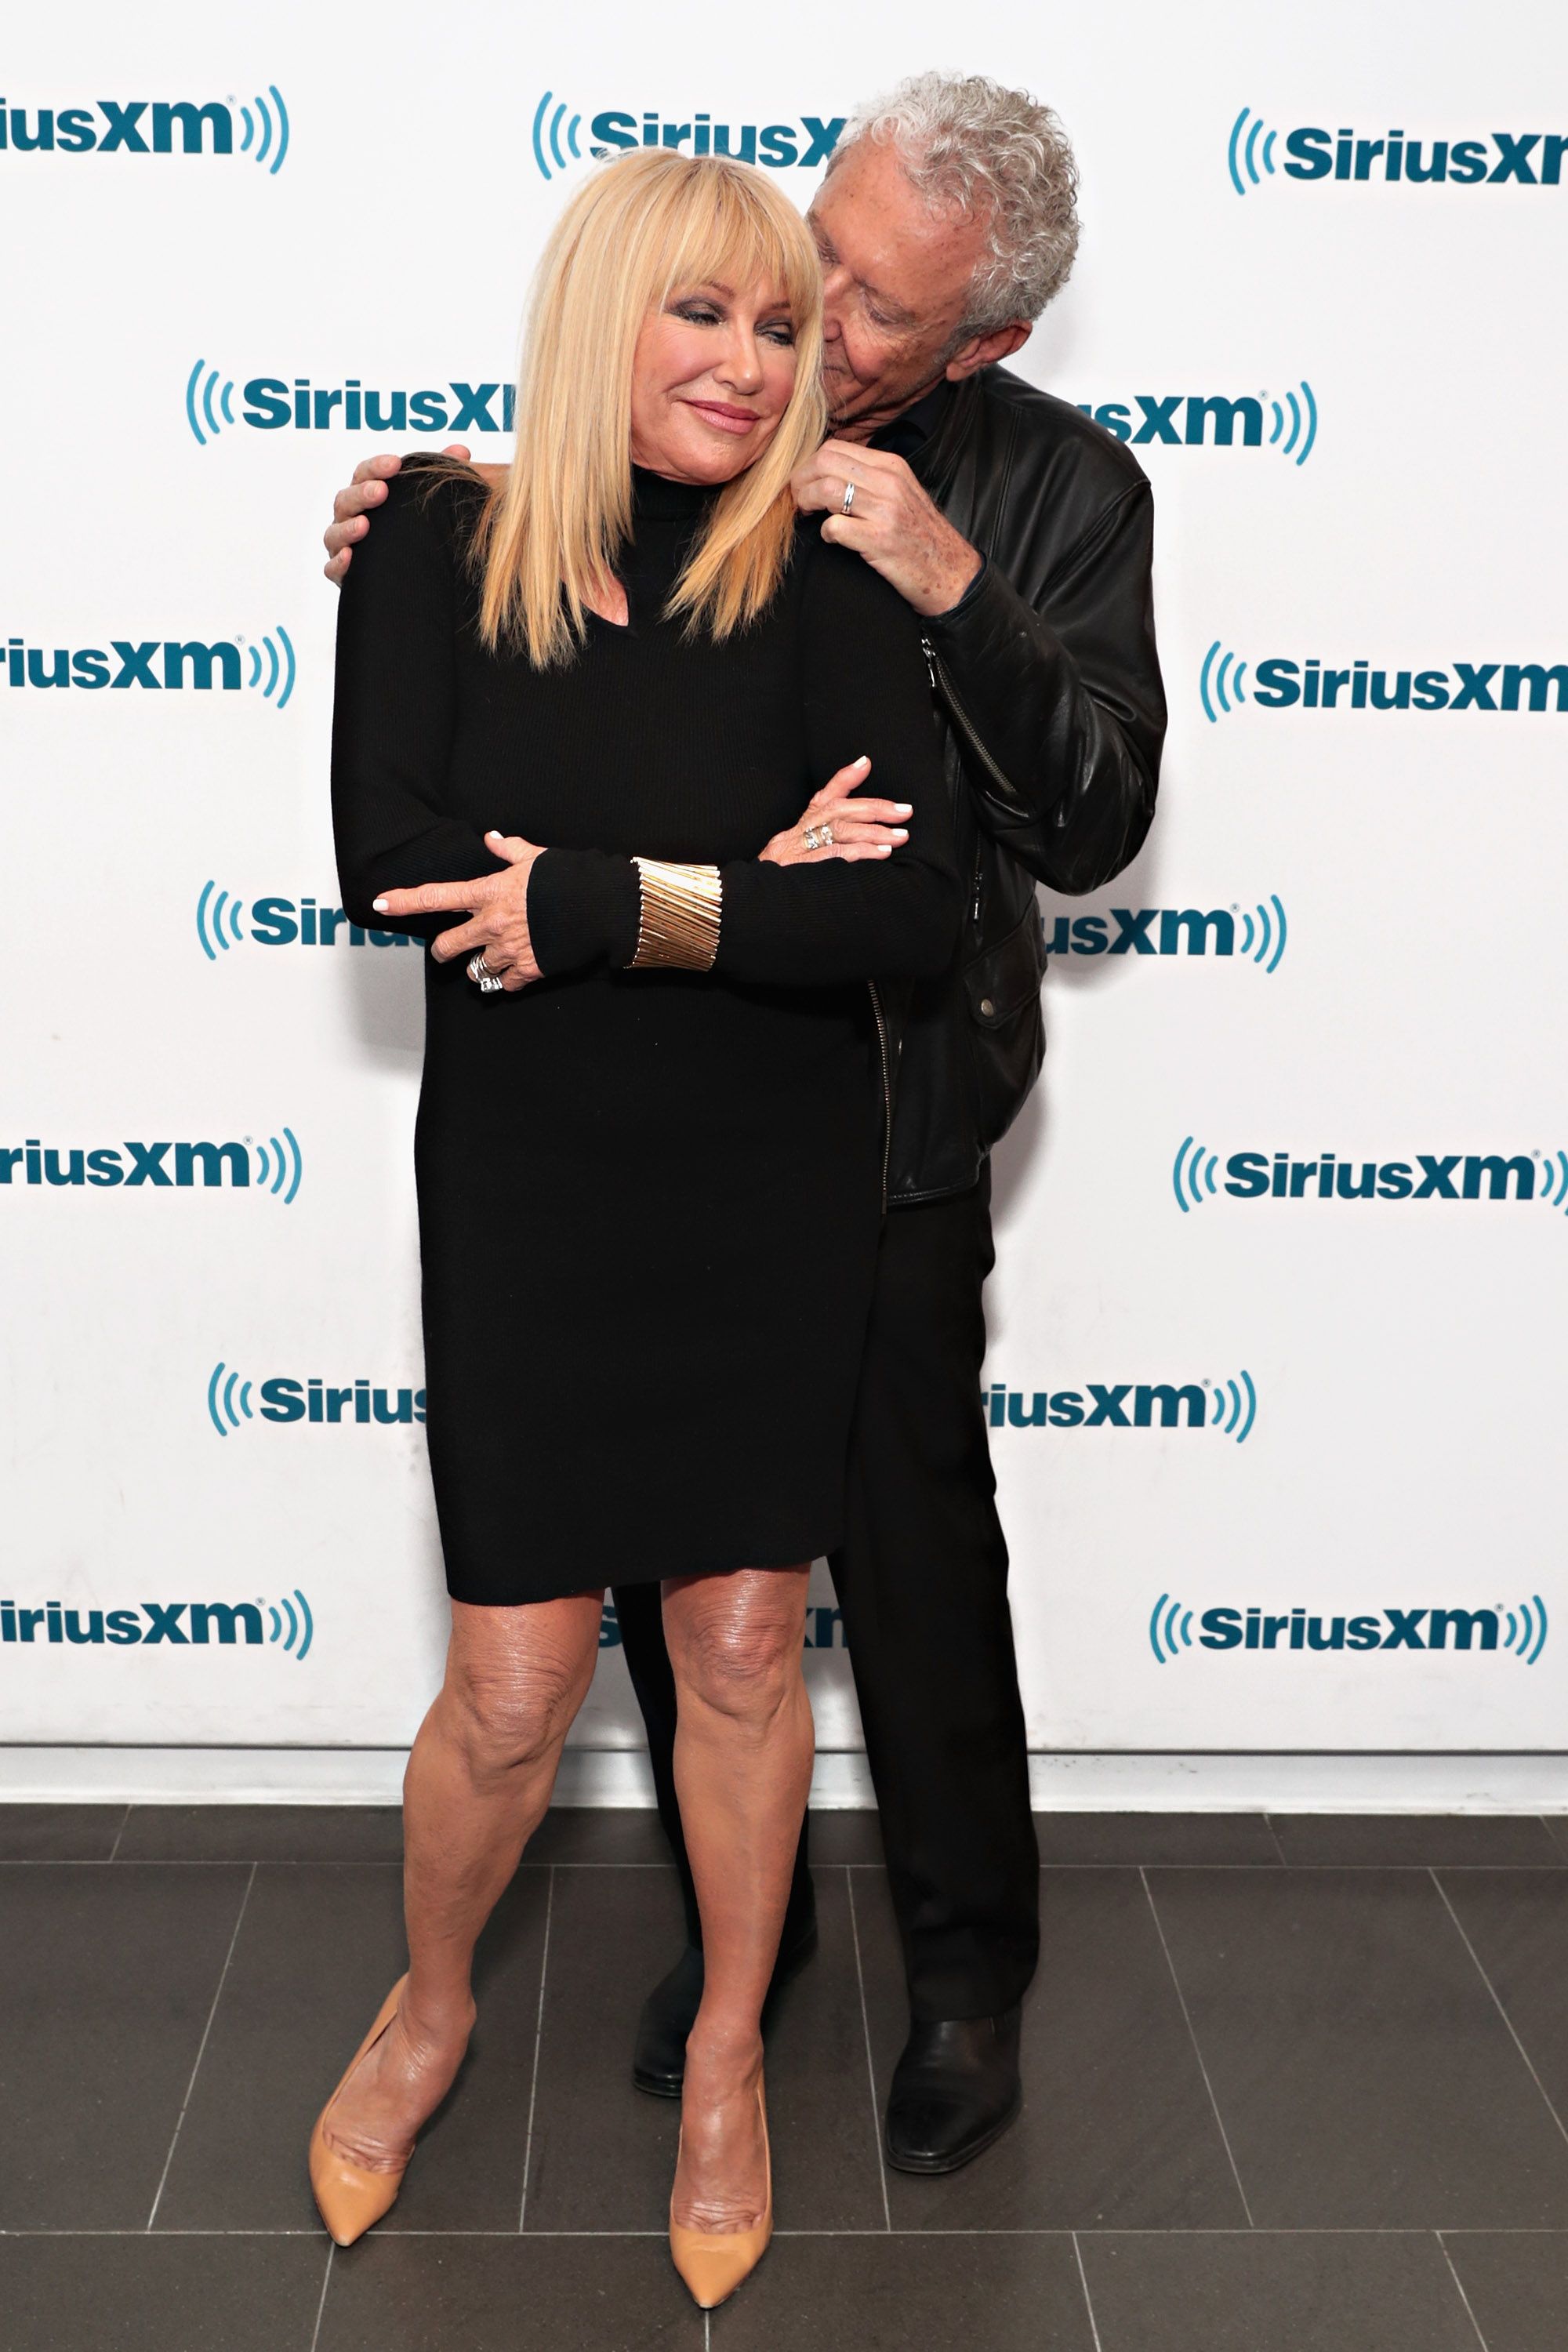 Suzanne Somers and husband Alan Hamel at the SiriusXM Studios in 2017 in New York City | Source: Getty Images